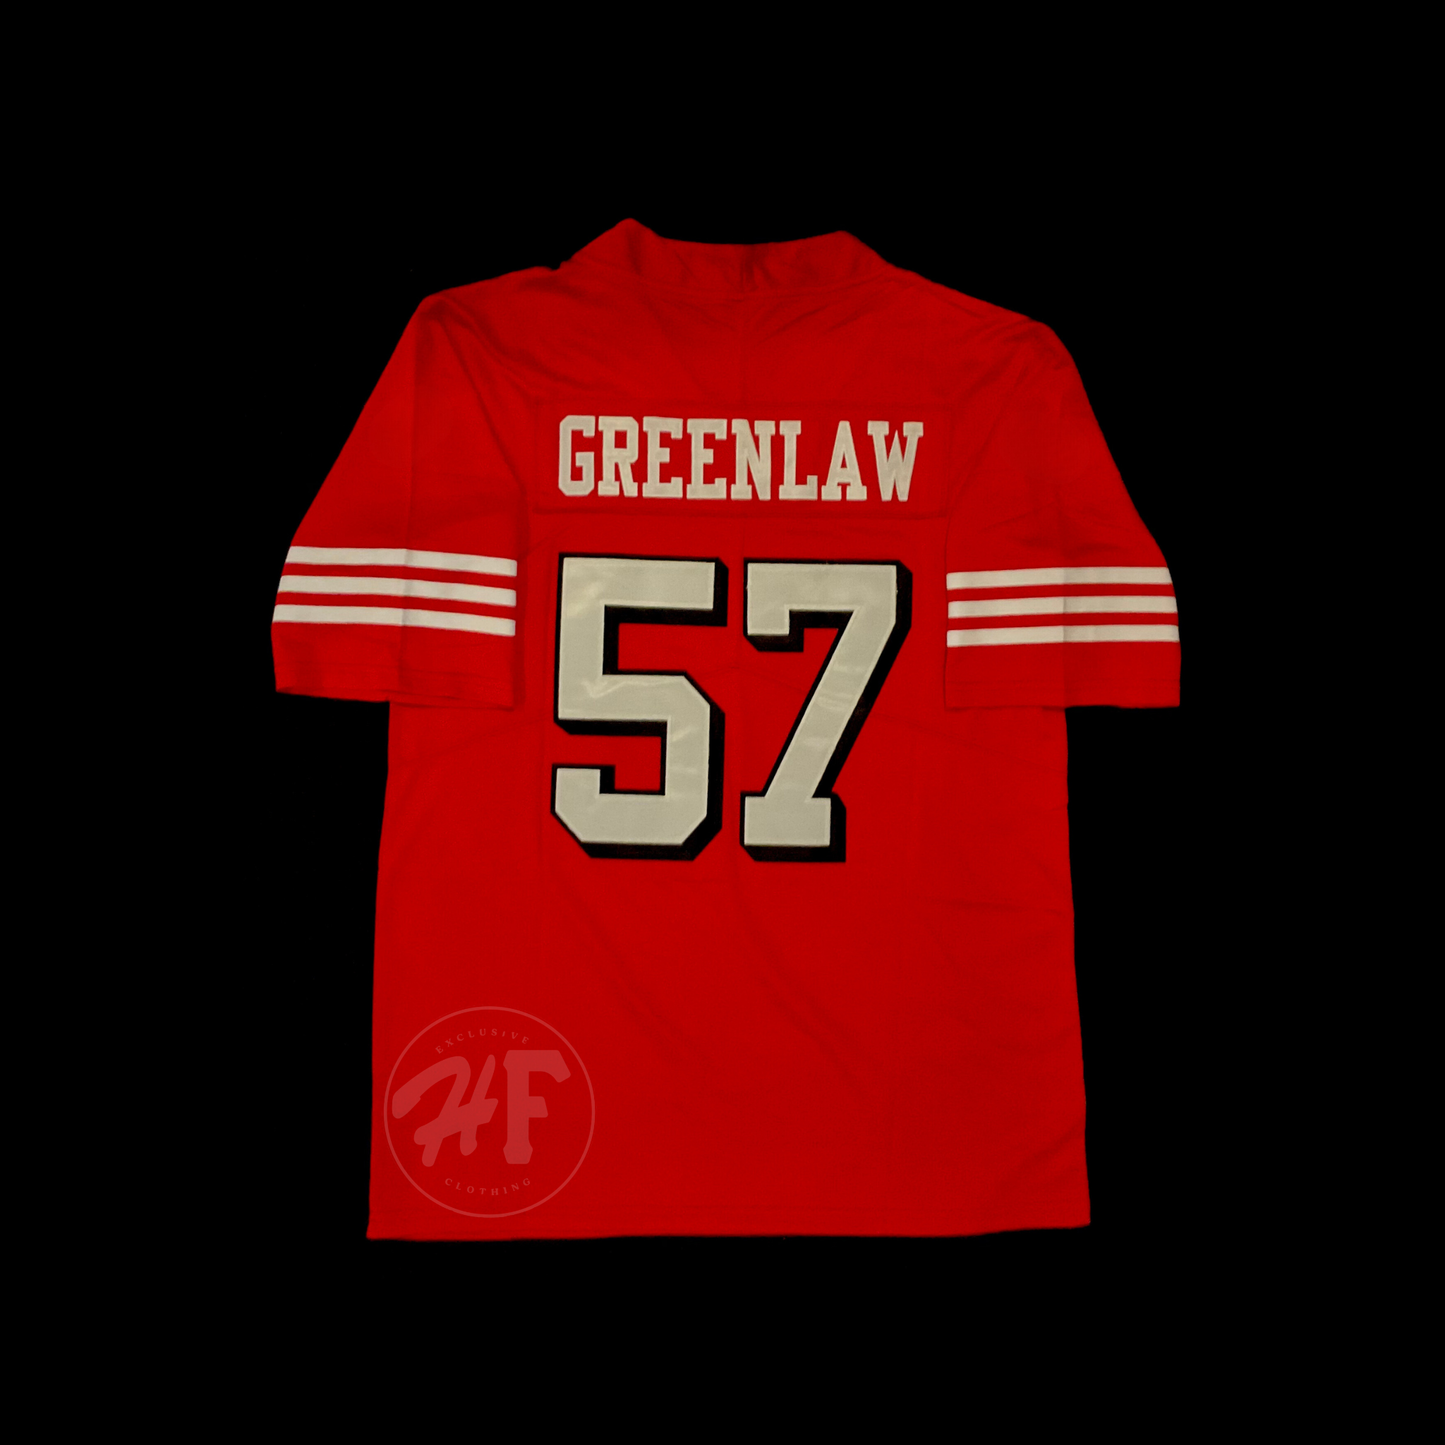 #57 Greenlaw Stitched Men’s 49ers jersey